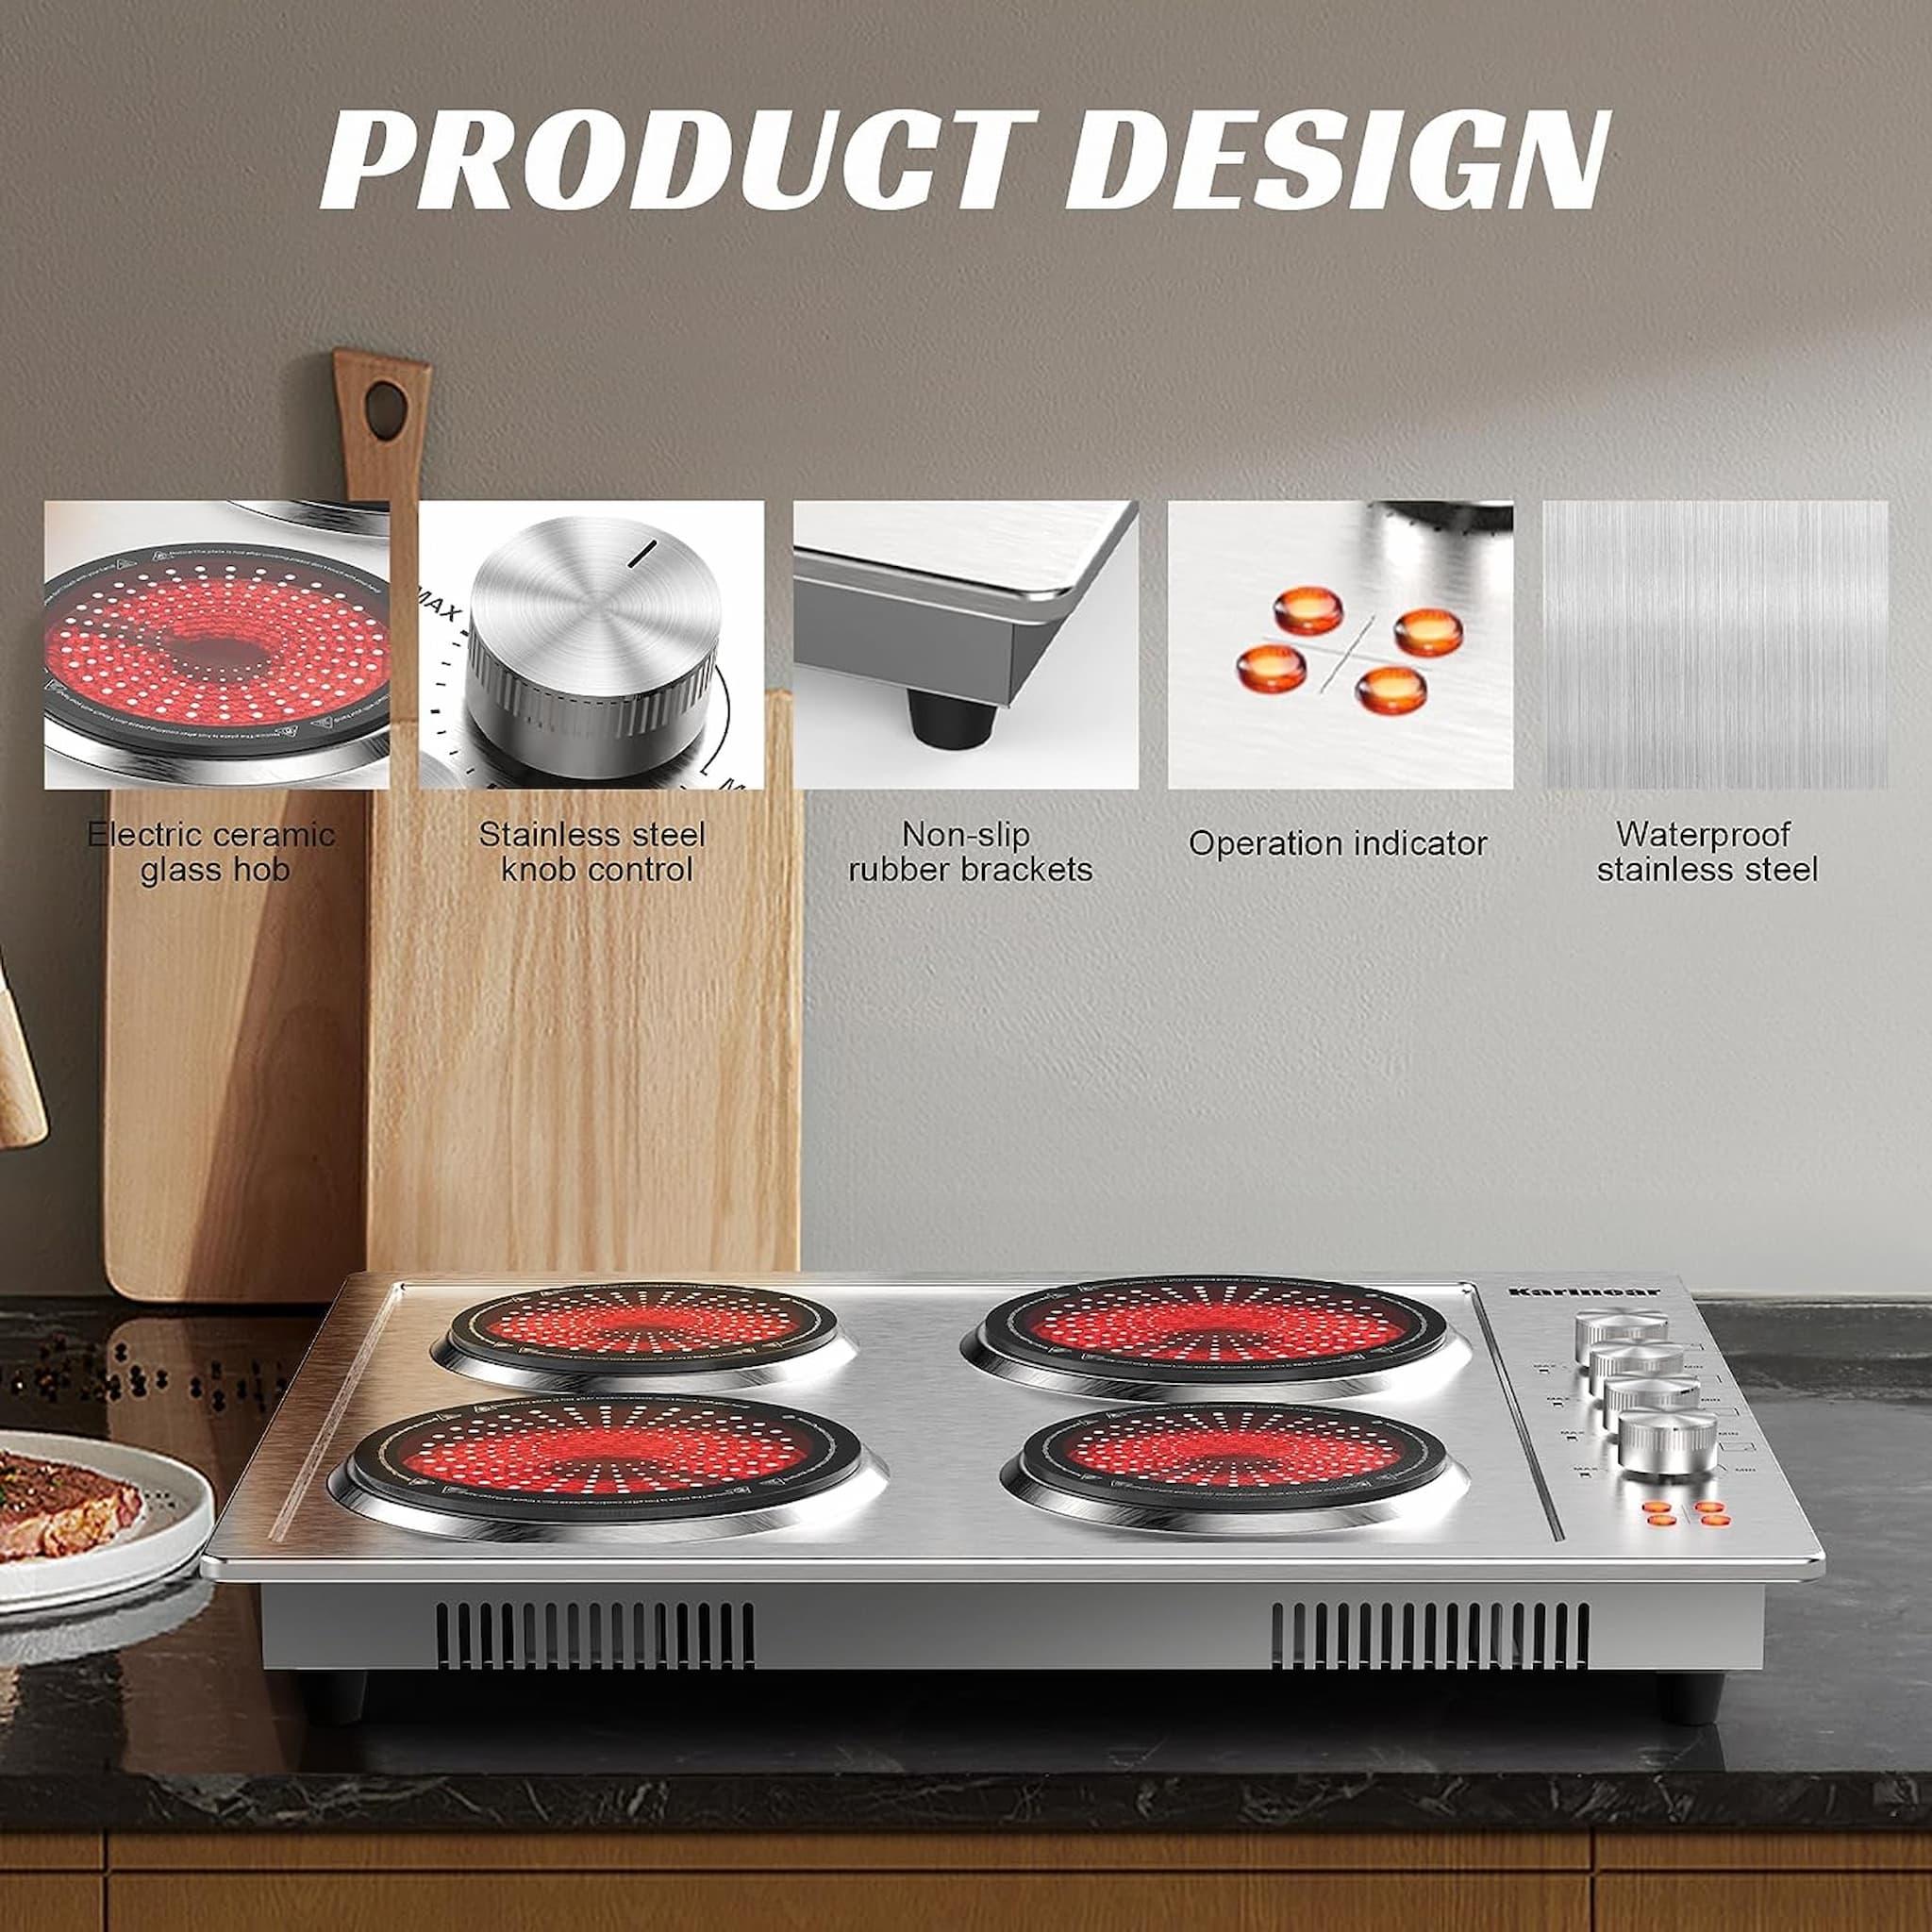 The 24 inch electric ceramic stove has a knob design, one knob corresponds to one burner, and the heating temperature can be adjusted by rotating it, which makes it very easy to operate, and is very suitable for the elderly or or people with poor eyesight.